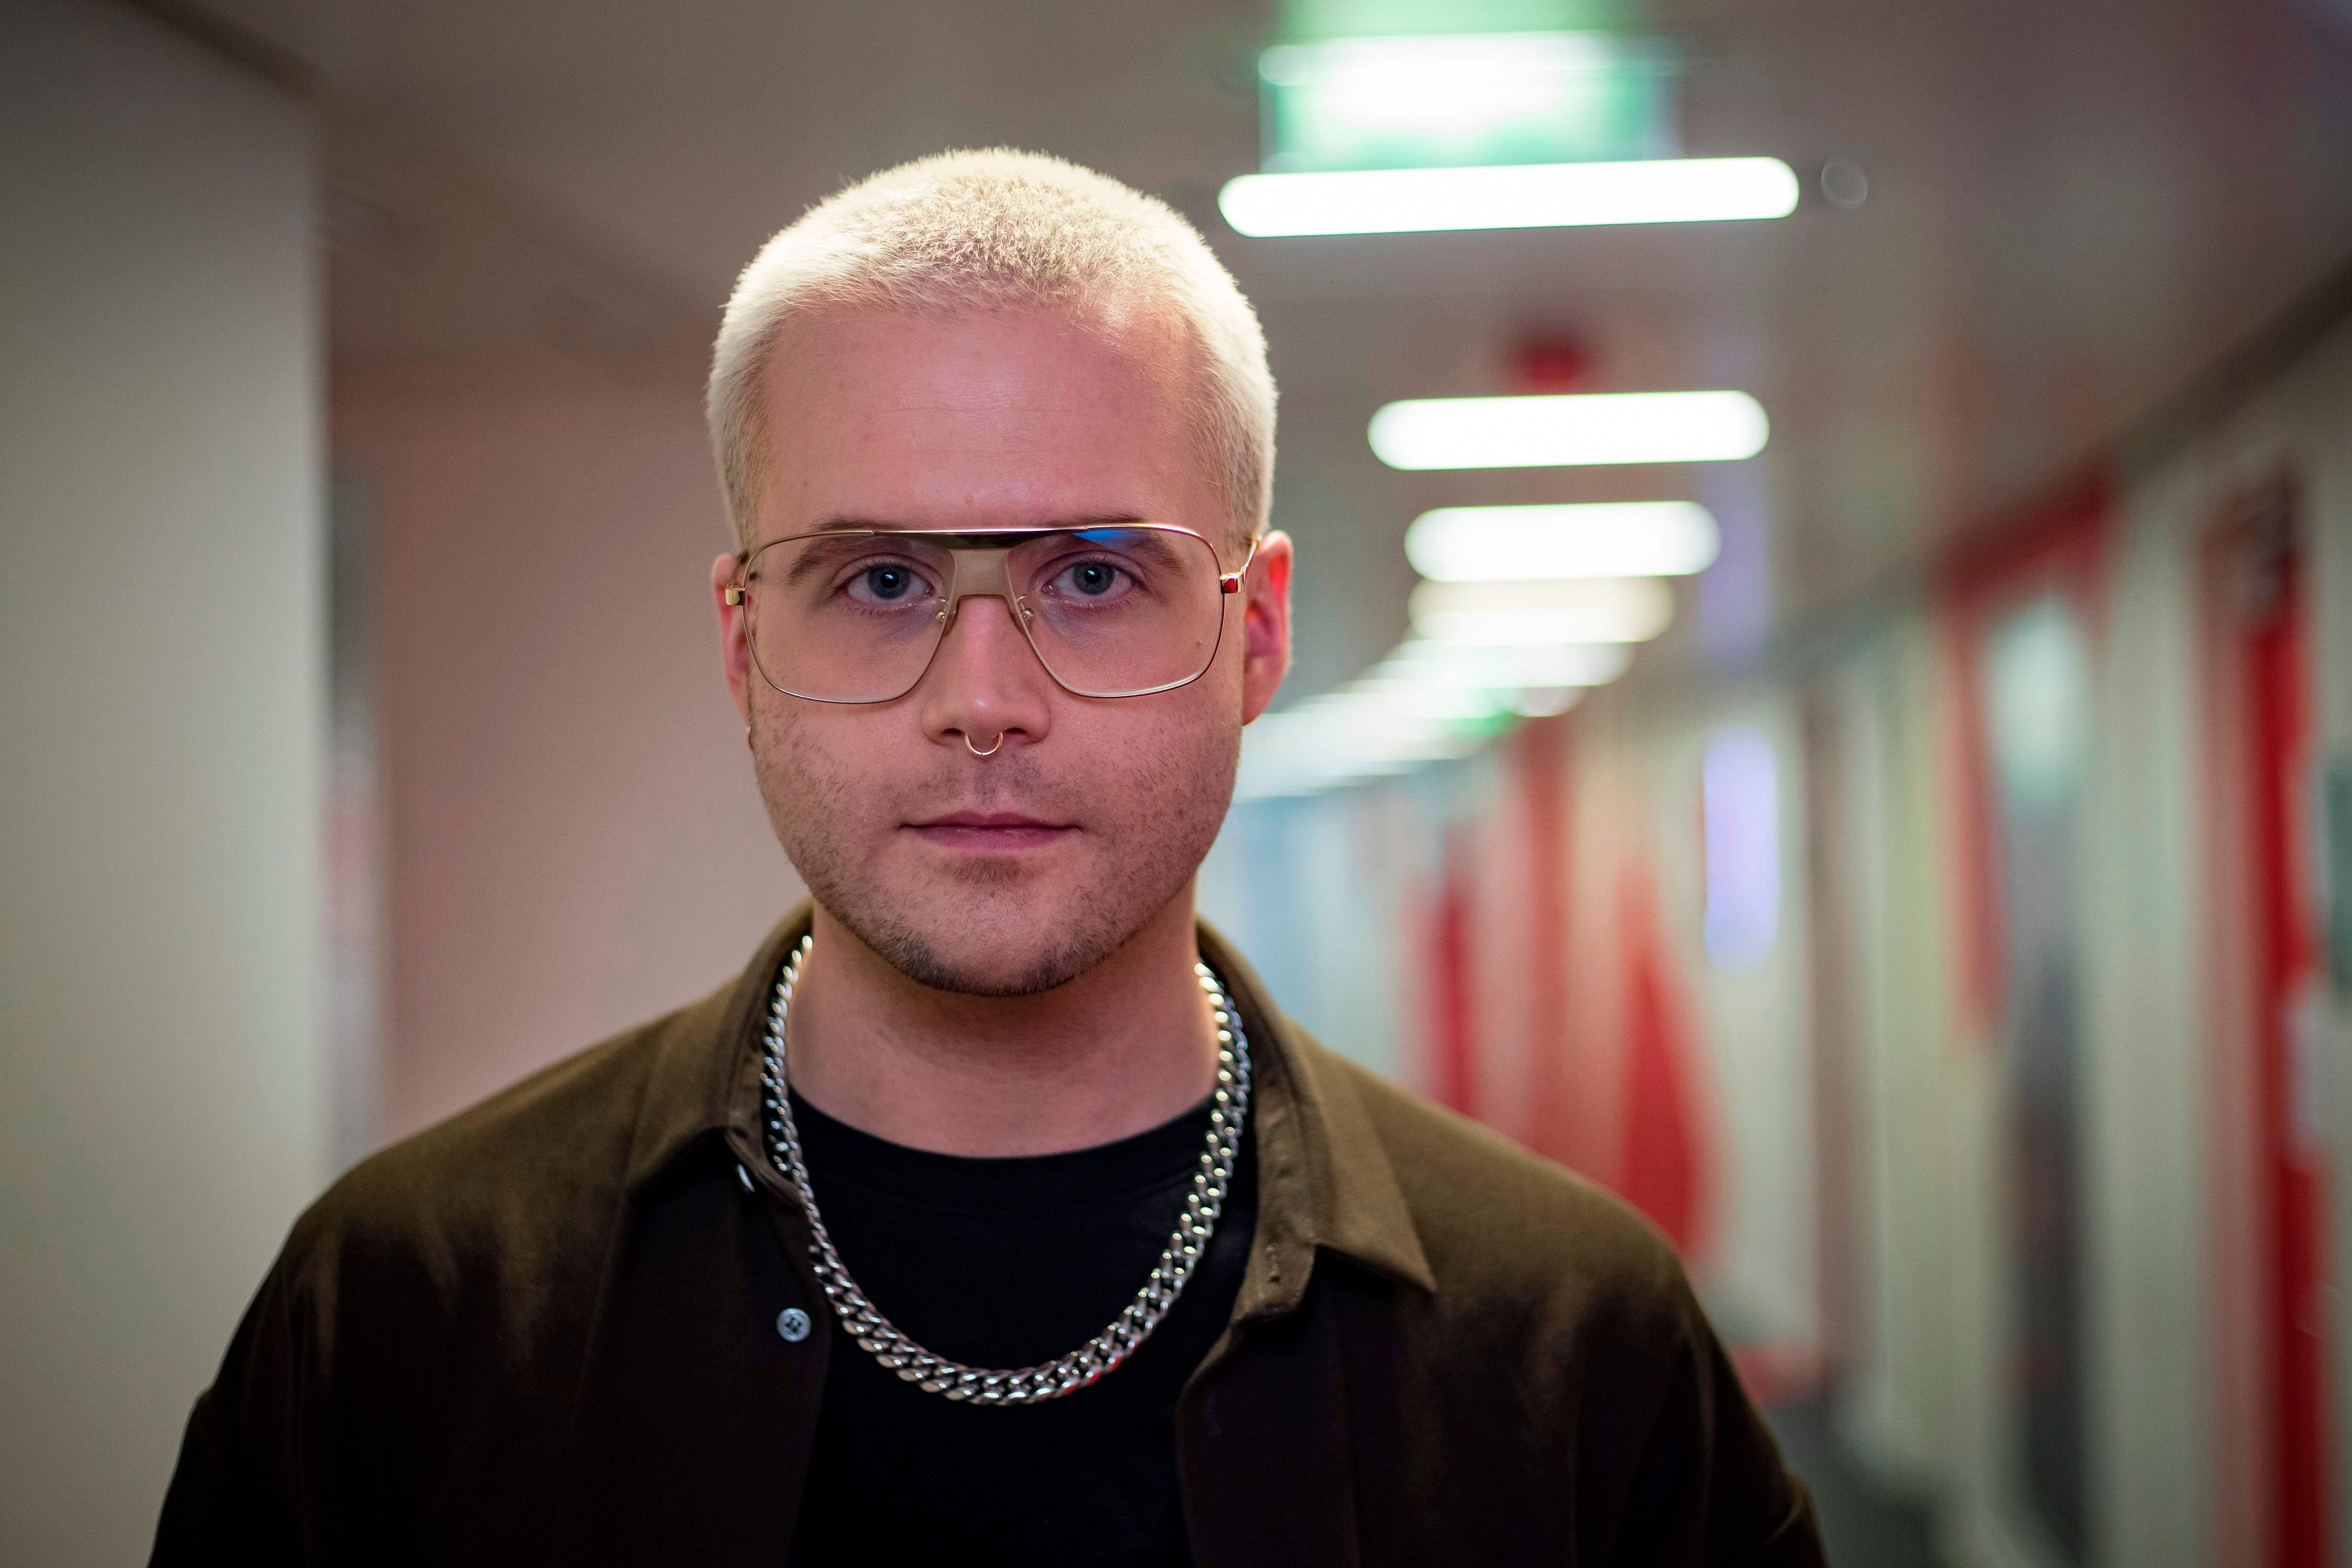 Canadian whistleblower Christopher Wylie. (AFP Photo)